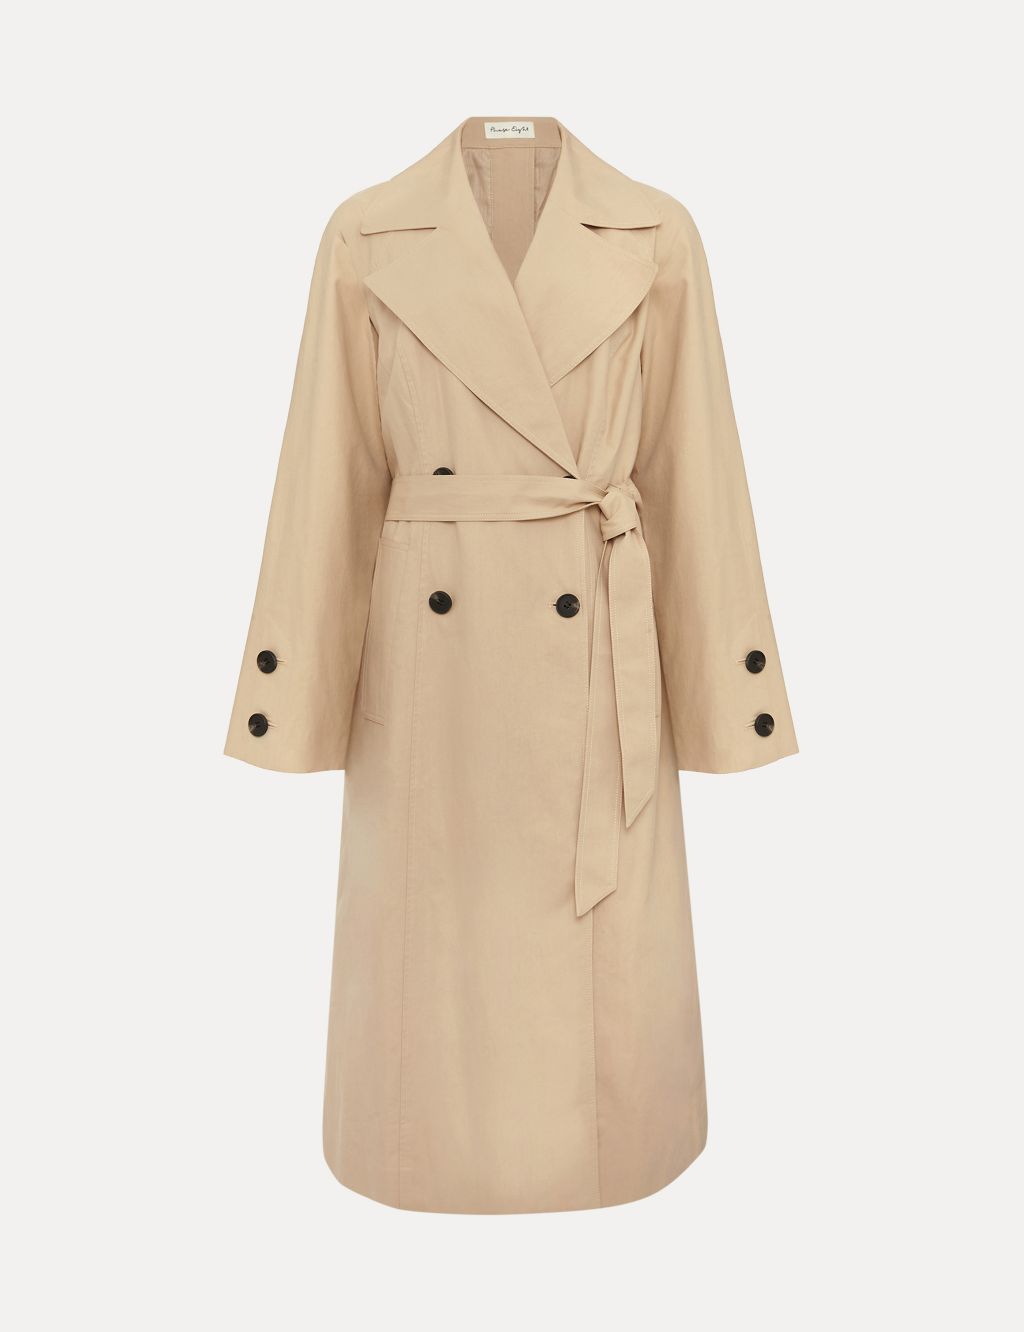 Cotton Rich Belted Collared Trench Coat | Phase Eight | M&S